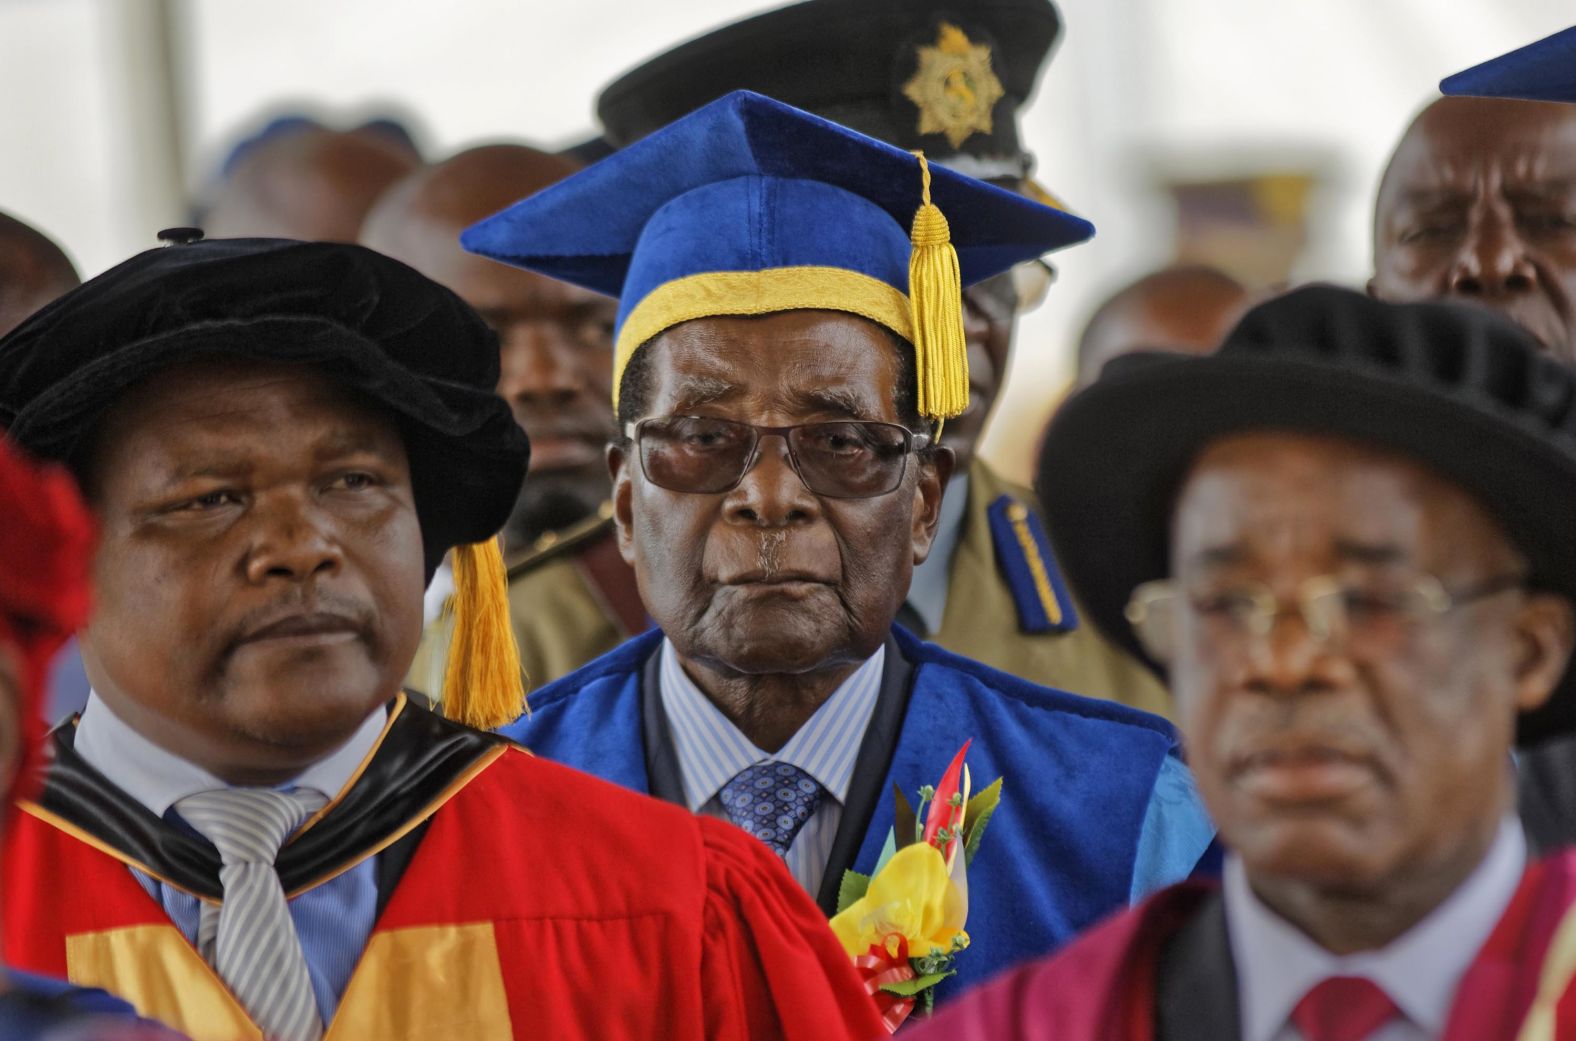 Mugabe arrives to preside over a student graduation ceremony at Zimbabwe Open University in November 2017. It was his first public appearance since the military <a href="index.php?page=&url=http%3A%2F%2Fwww.cnn.com%2F2017%2F11%2F15%2Fafrica%2Fgallery%2Fzimbabwe-political-unrest%2Findex.html" target="_blank">seized control of the nation</a> and placed him under house arrest.